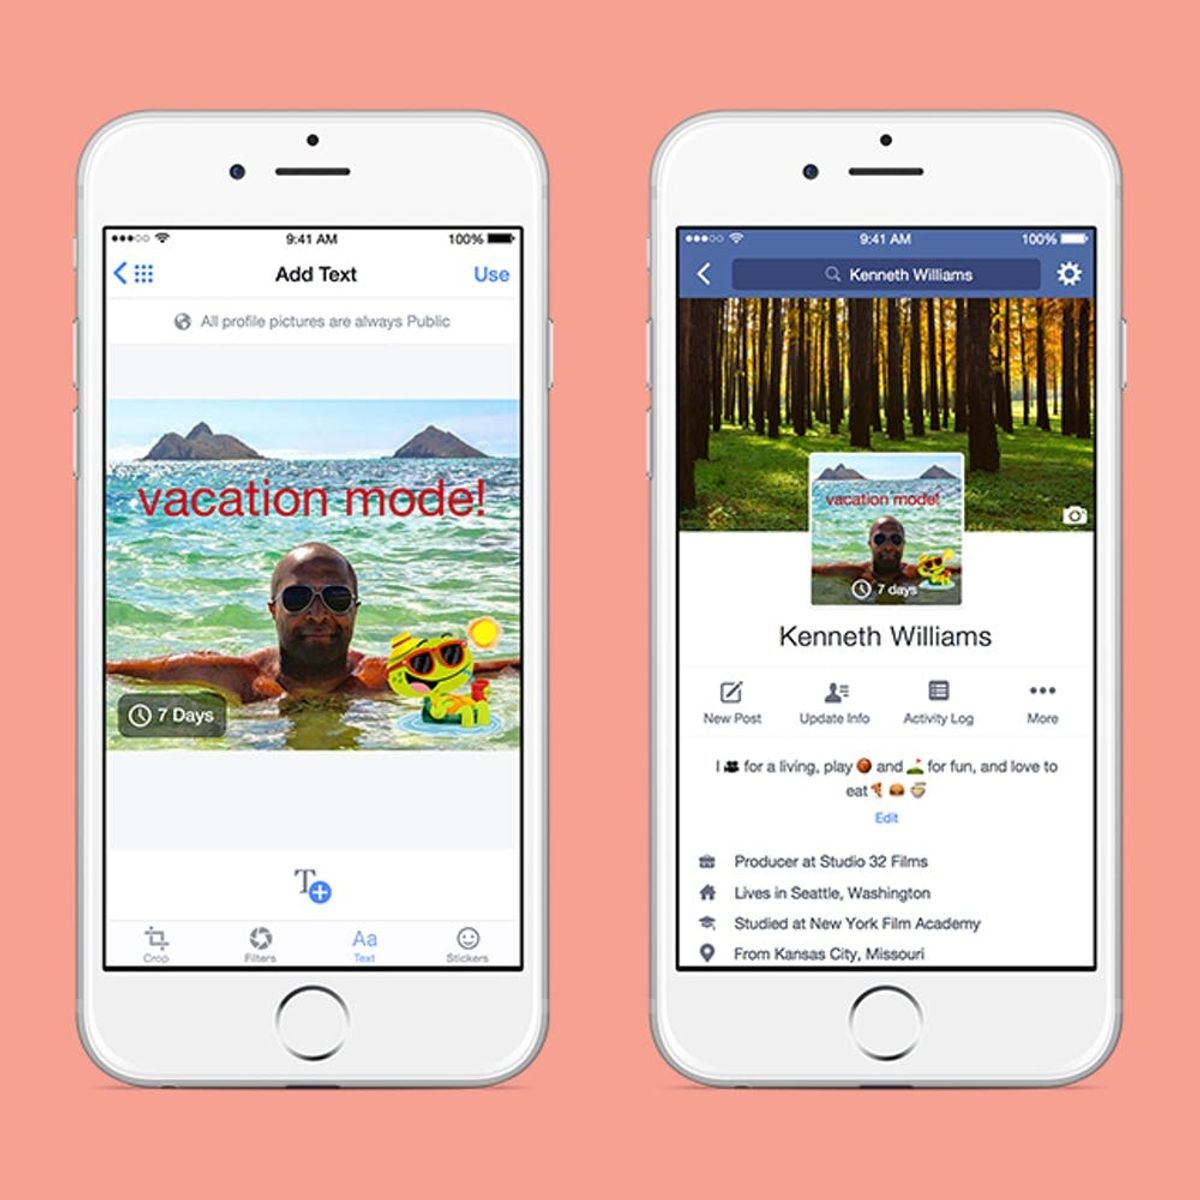 Facebook Is Reinventing the Profile Picture in Latest Update